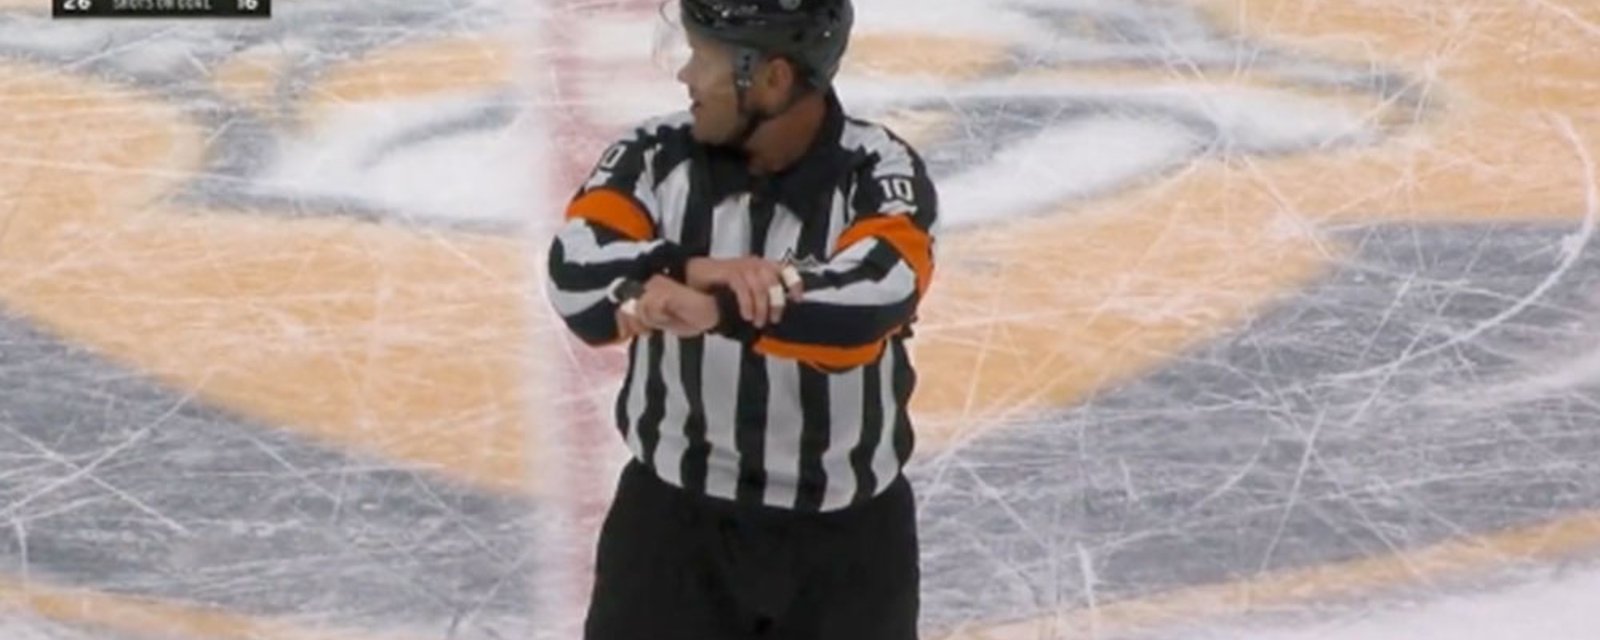 Referee chirps Kris Letang on hot mic and the crowd's reaction is perfect